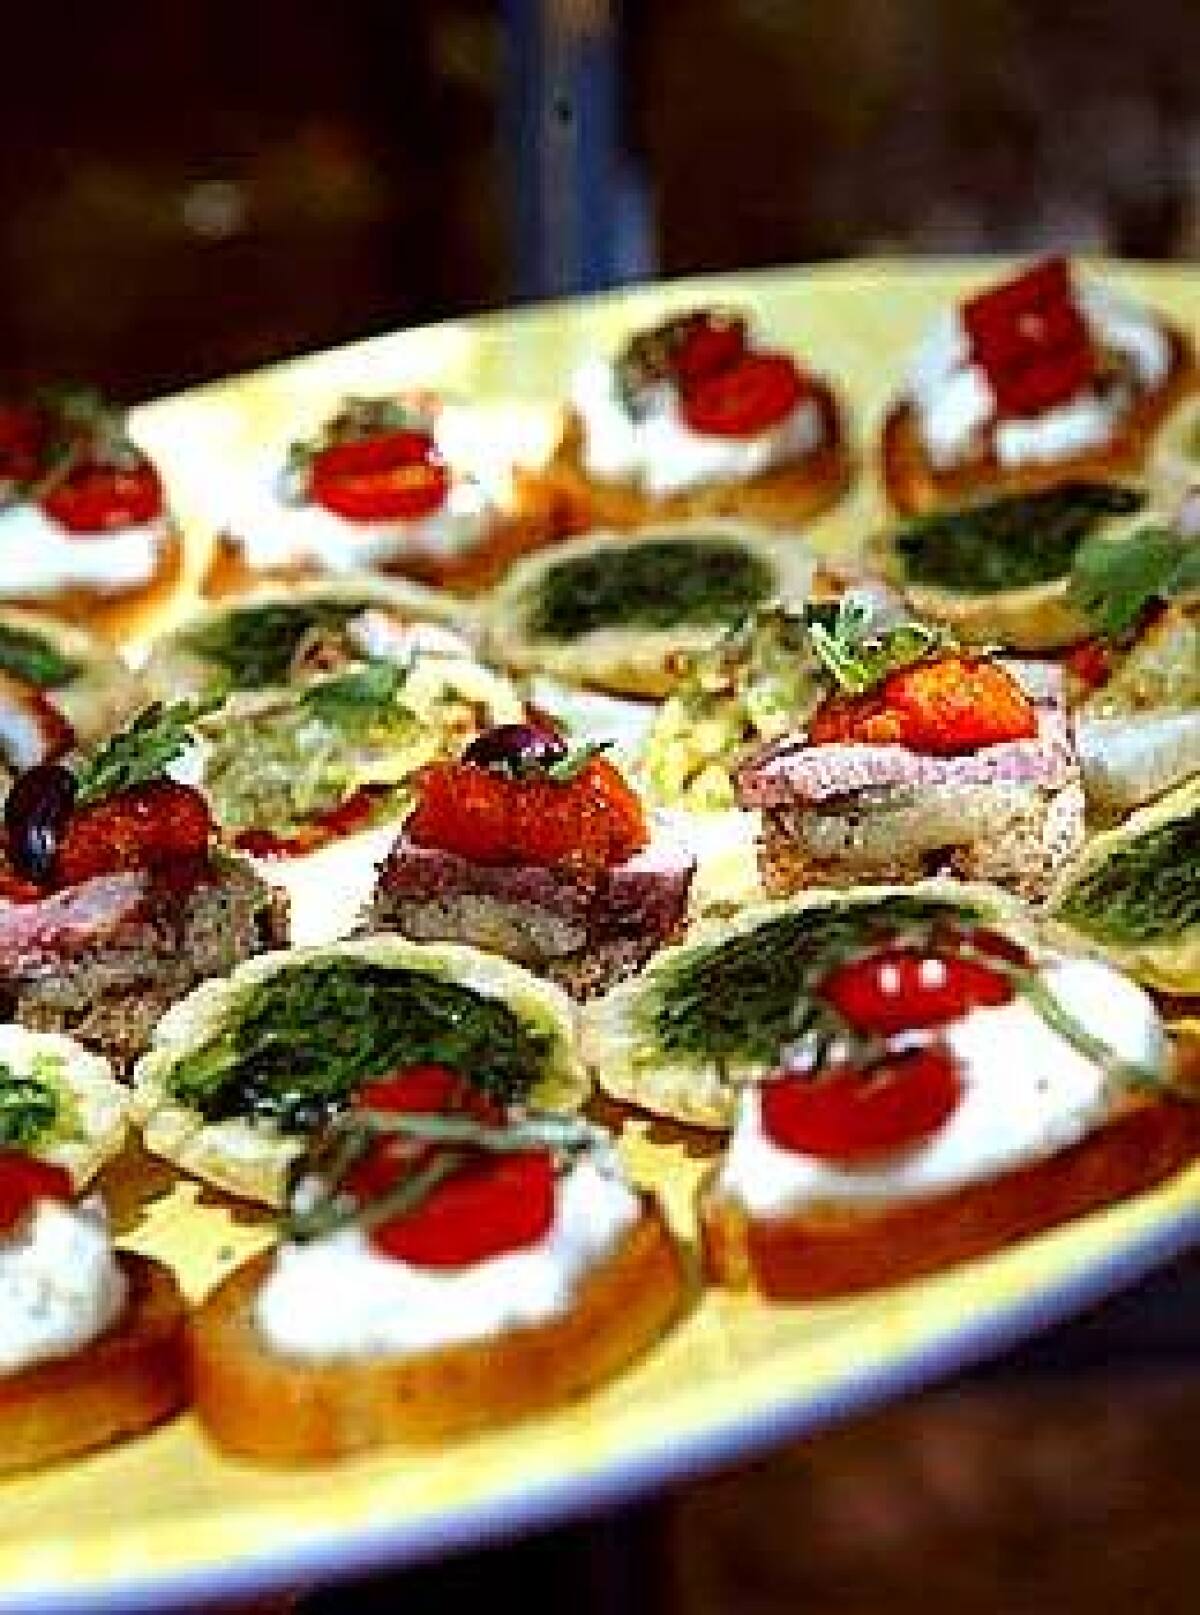 Latin, Asian and Mediterranean flavors come together on a tray of summer canapés. Caterers think of them as meal in one bite.